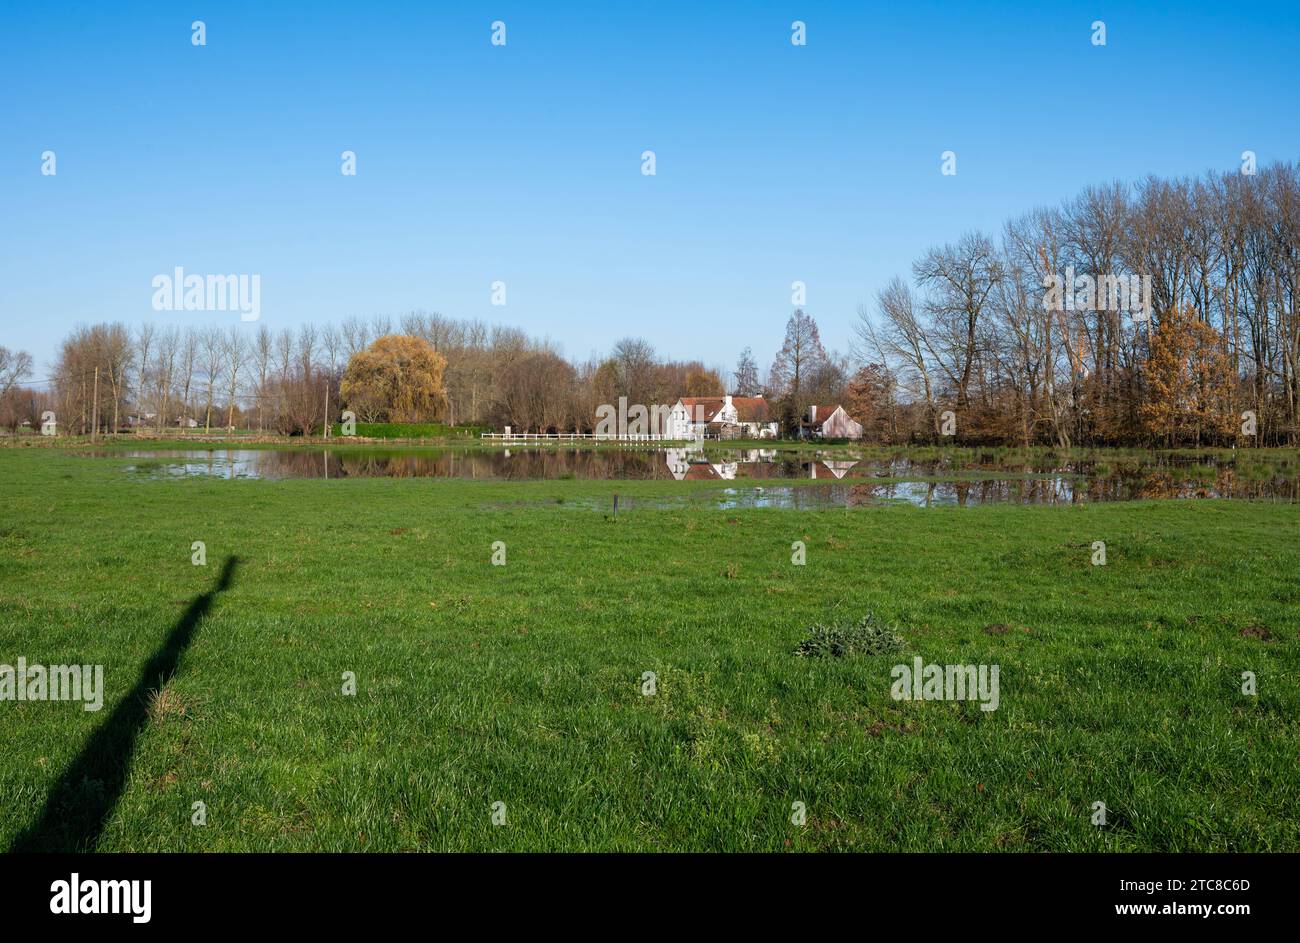 Flooded meadows with houses reflecting in the water, Imde, Meise, Belgium Credit: Imago/Alamy Live News Stock Photo